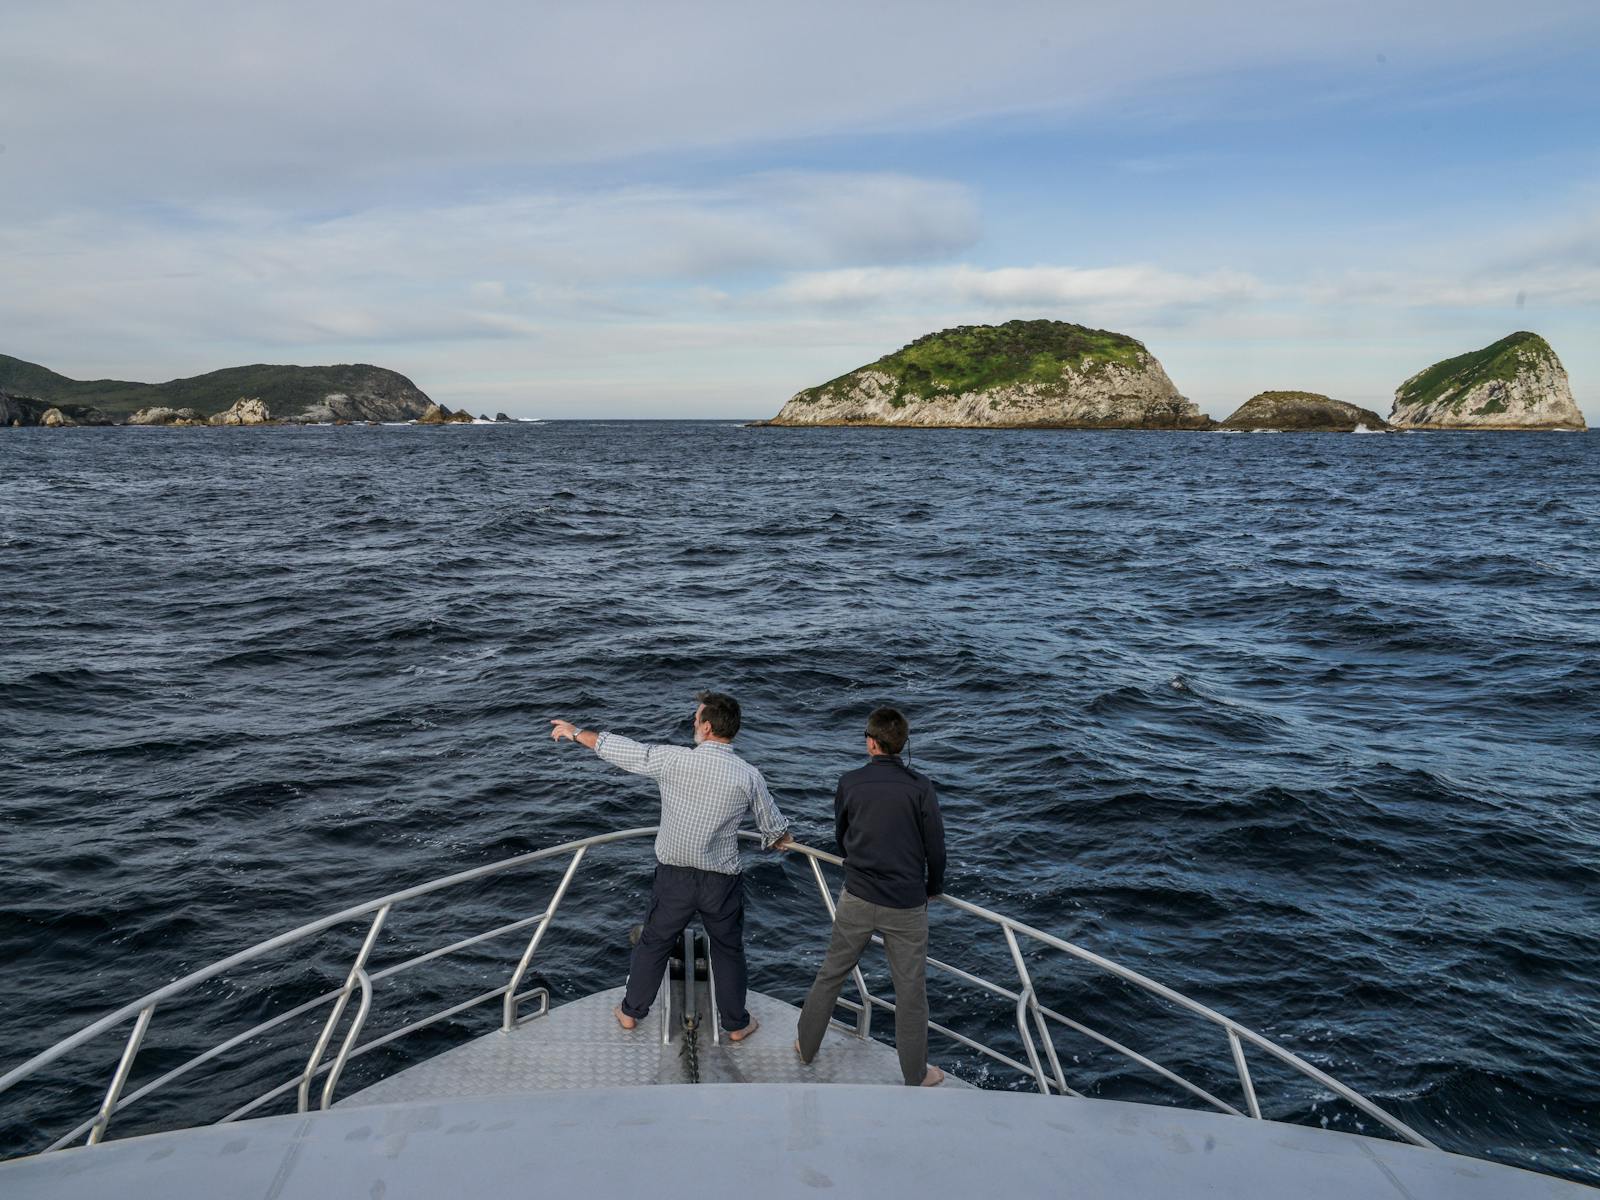 Two people on the bow of a boat, one is pointing and they are looking at islands in the distance.